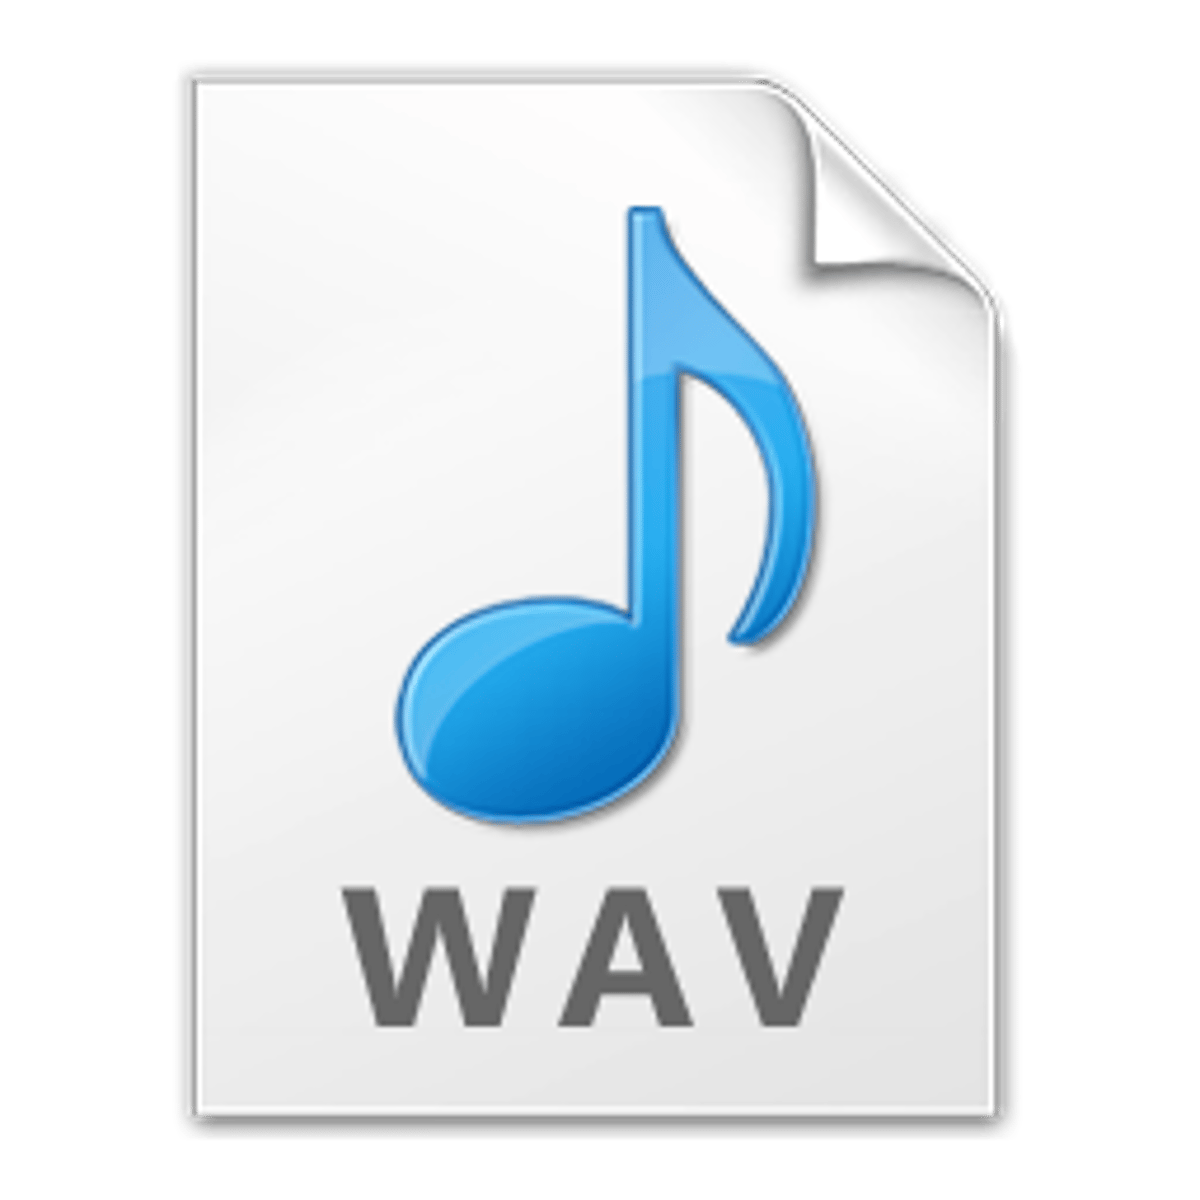 <p>(Waveform Audio File Format) an audio coding format standard for storing an audio bitstream of uncompressed audio data.</p>